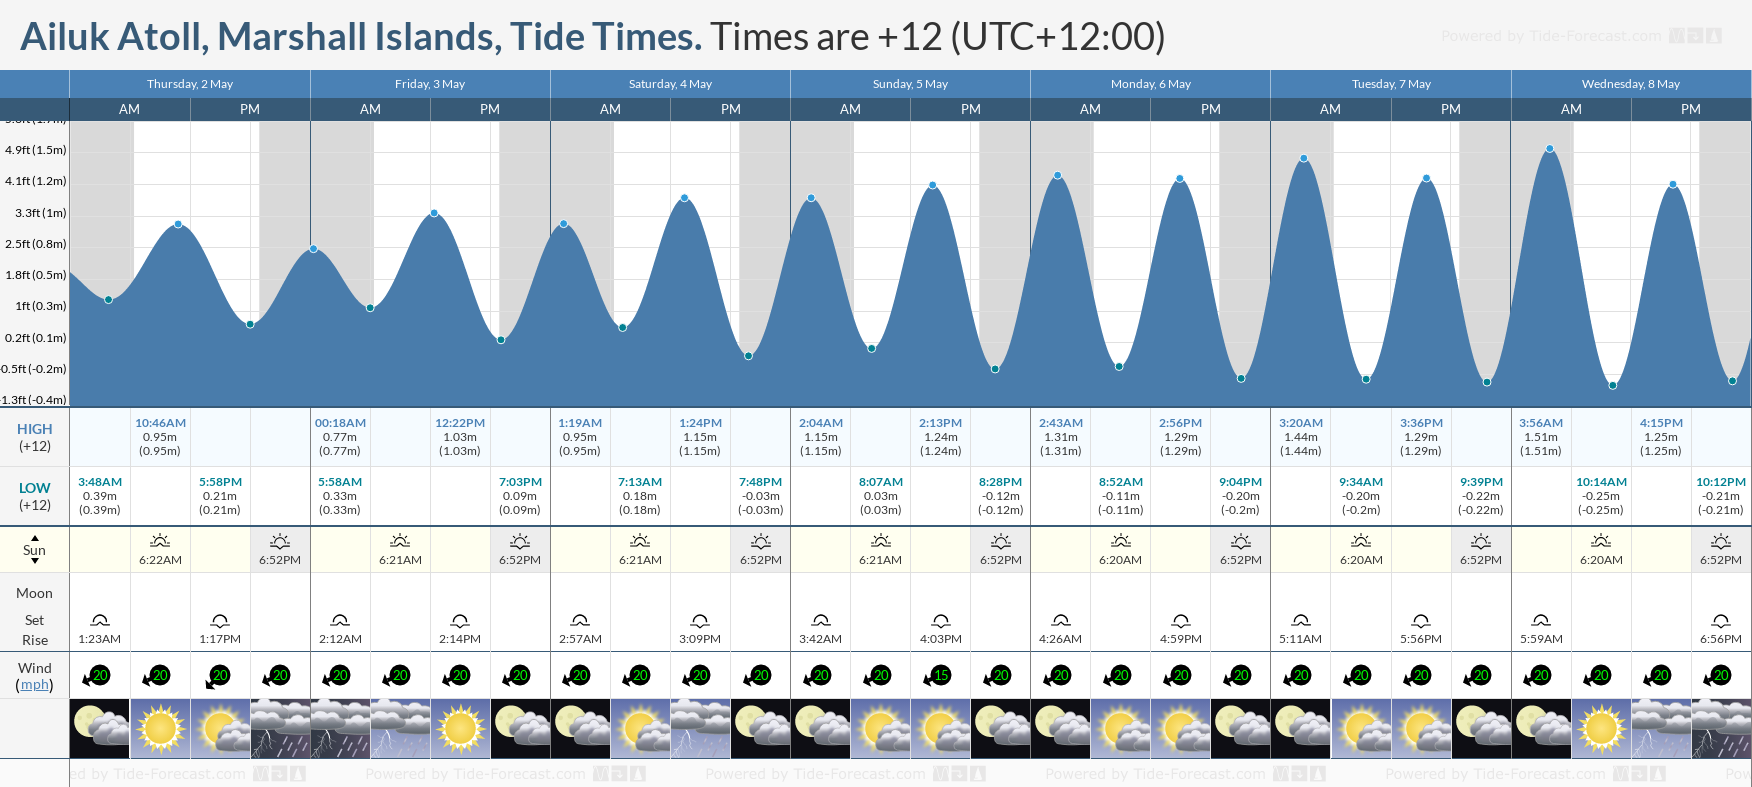 Ailuk Atoll, Marshall Islands Tide Chart including high and low tide tide times for the next 7 days